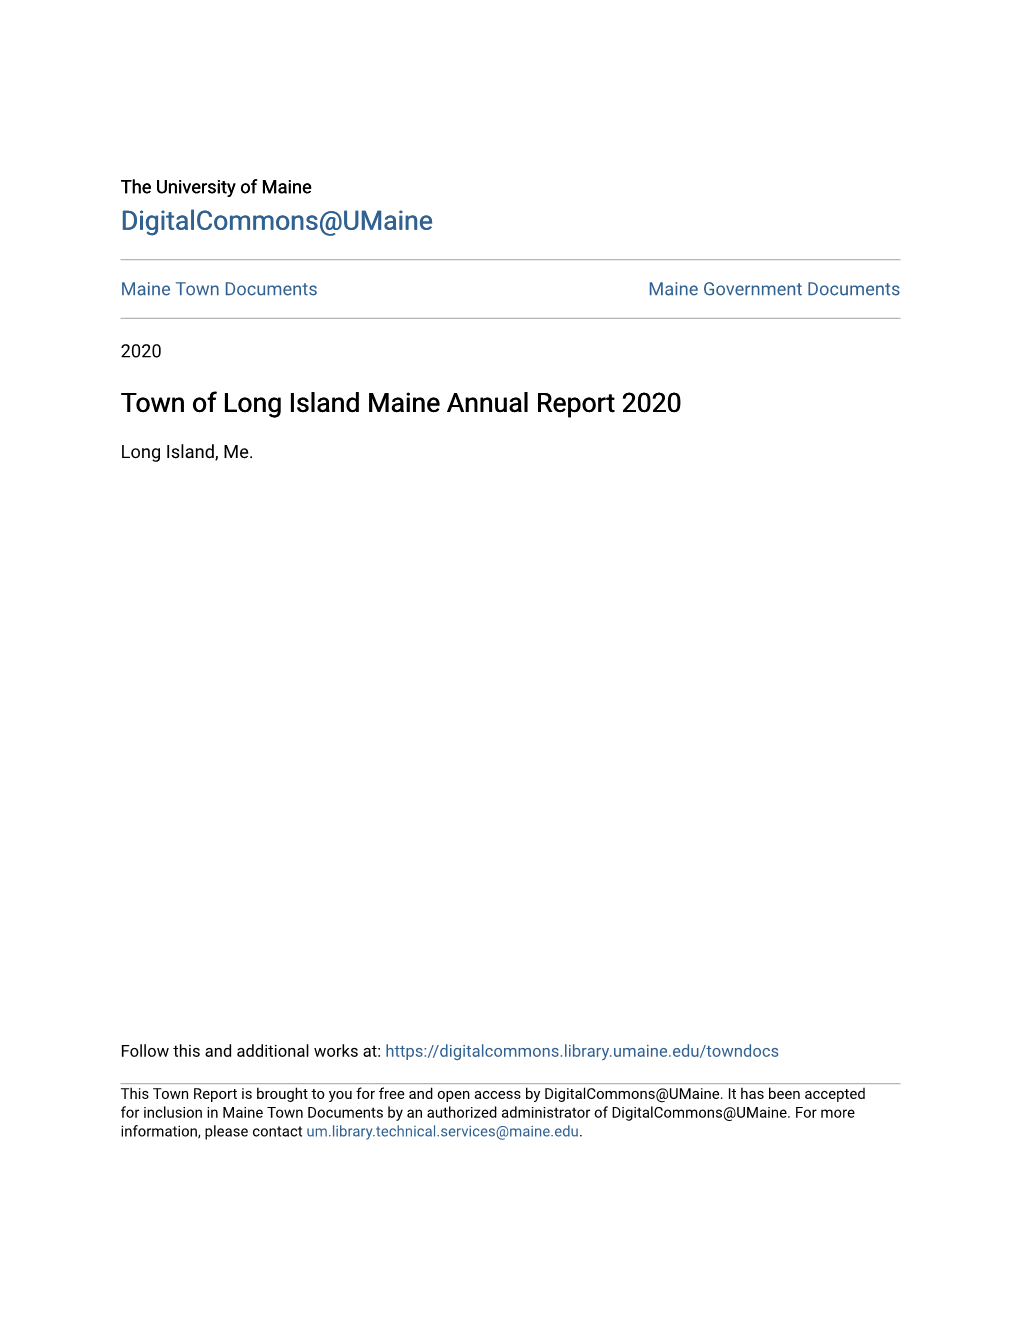 Town of Long Island Maine Annual Report 2020